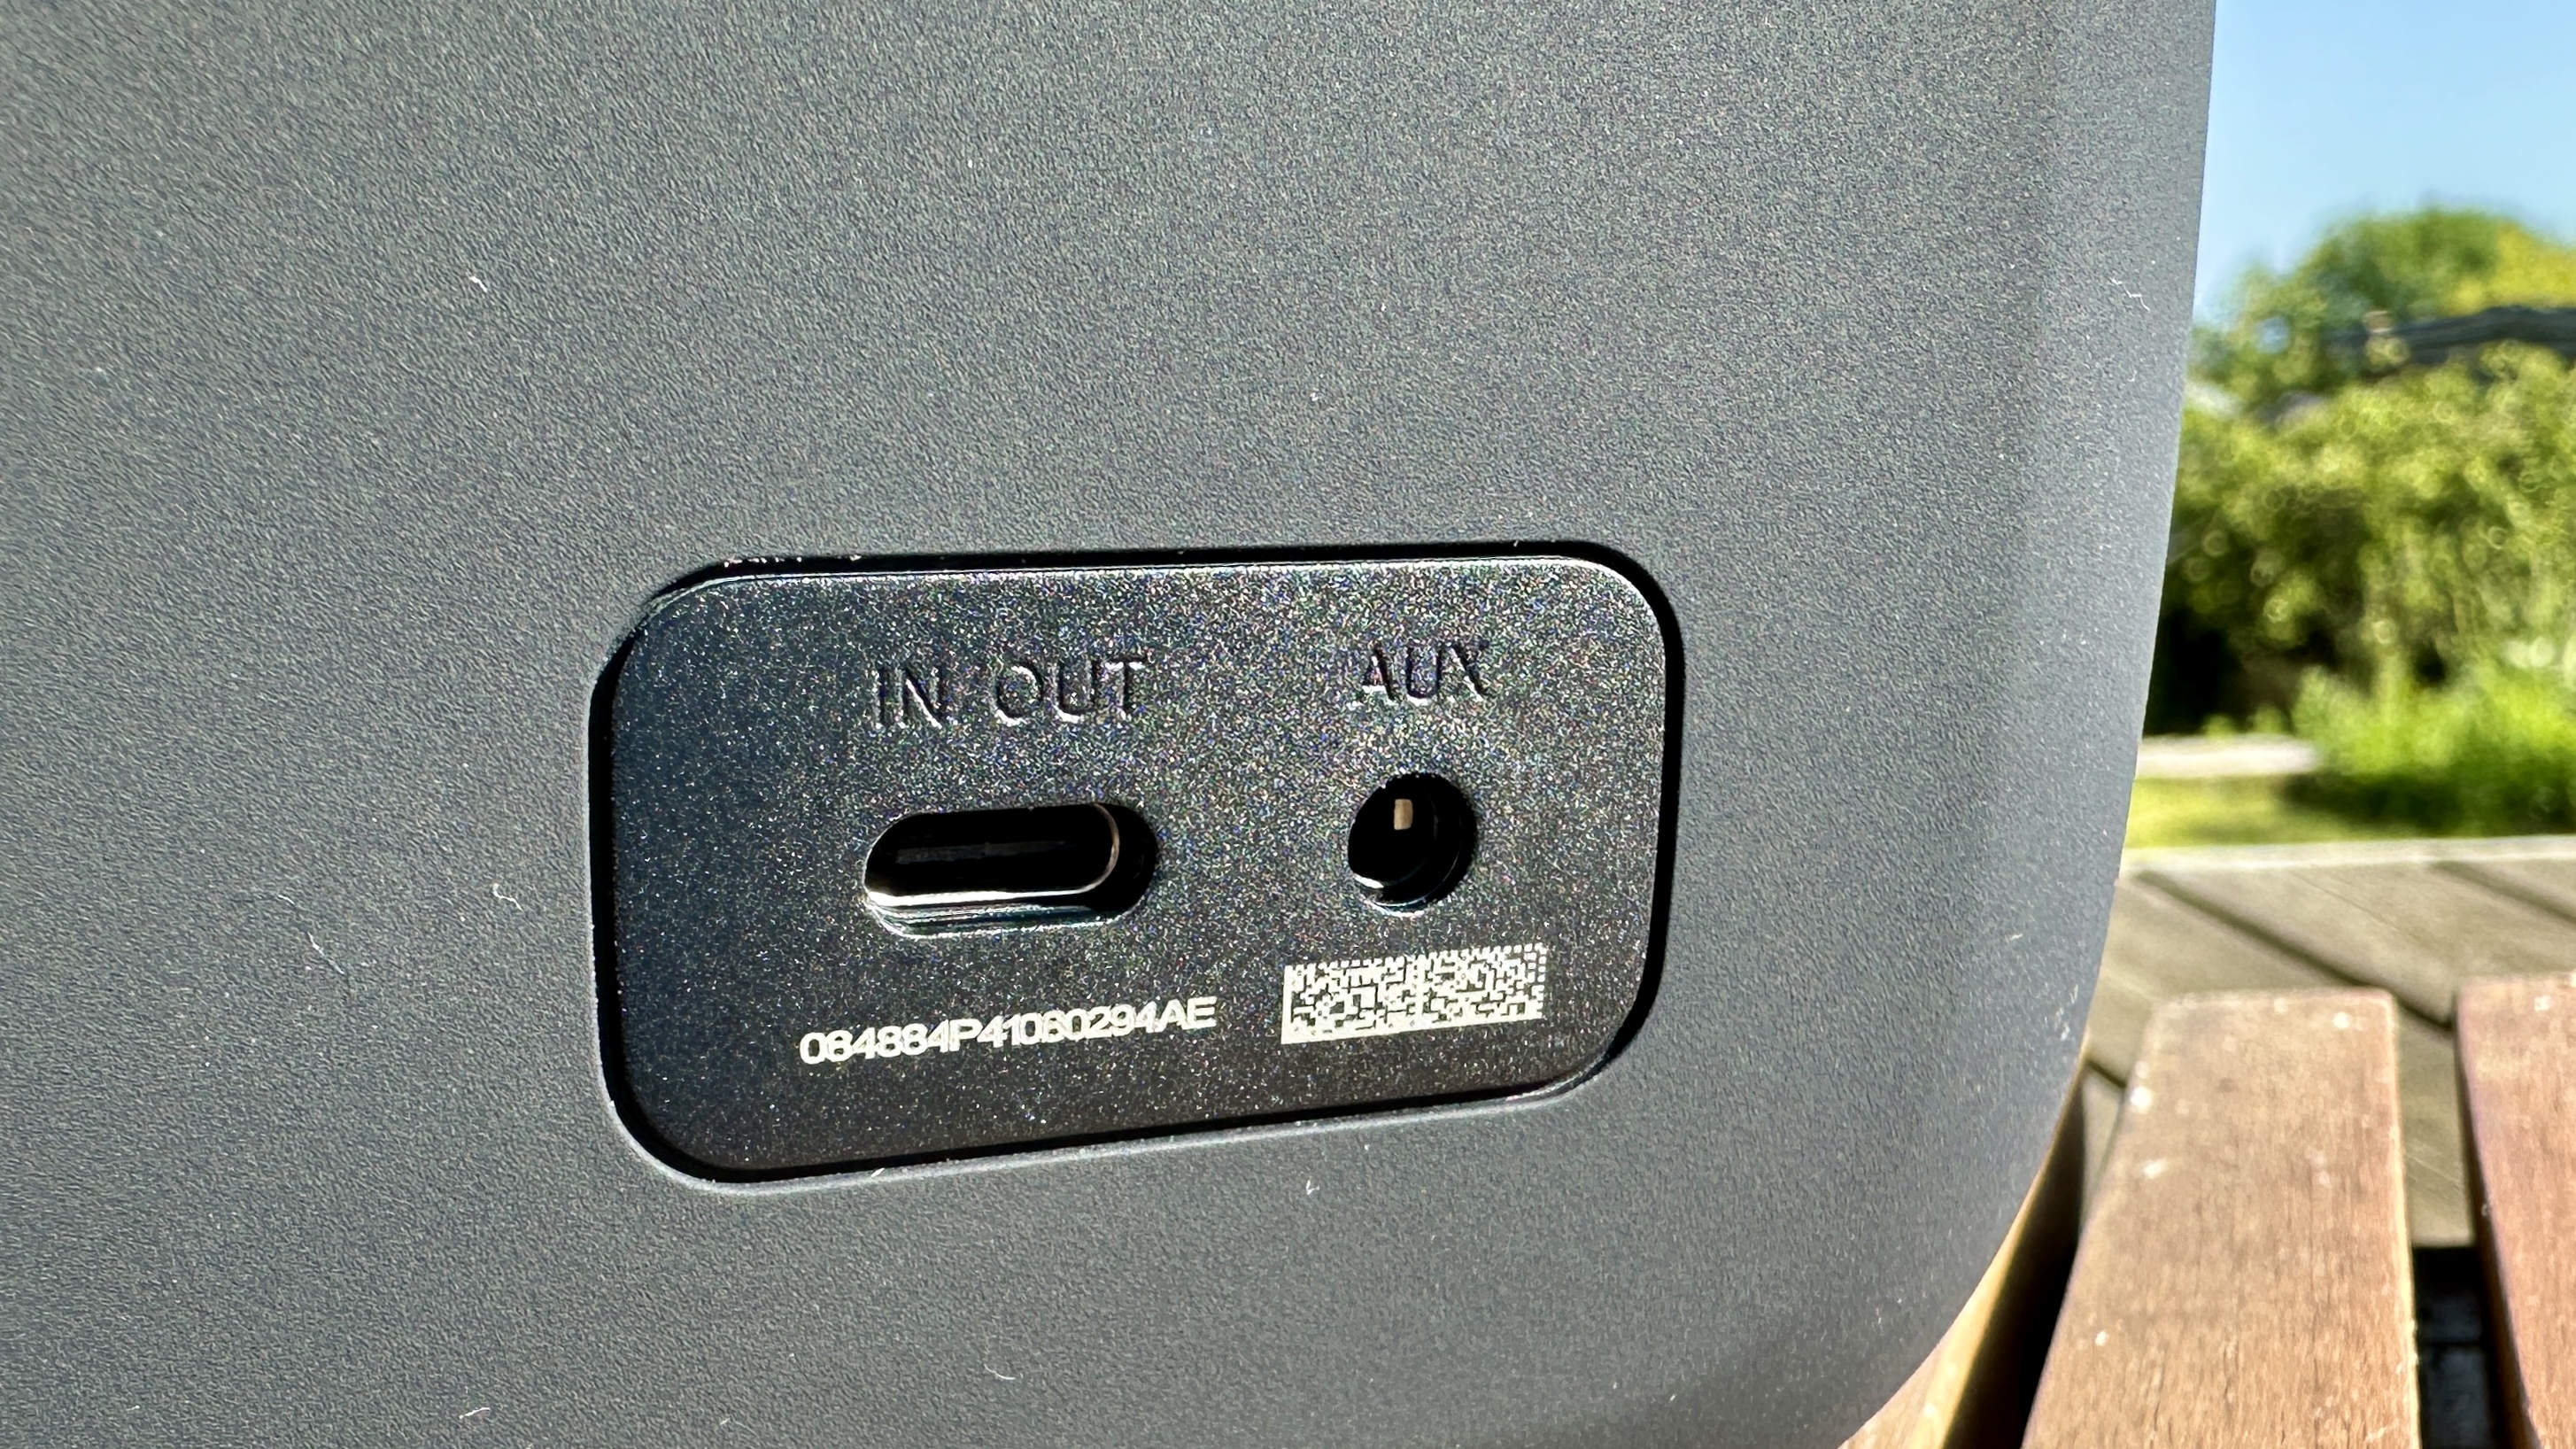 Bose SoundLink Max Bluetooth speaker showing AUX and USB-C ports